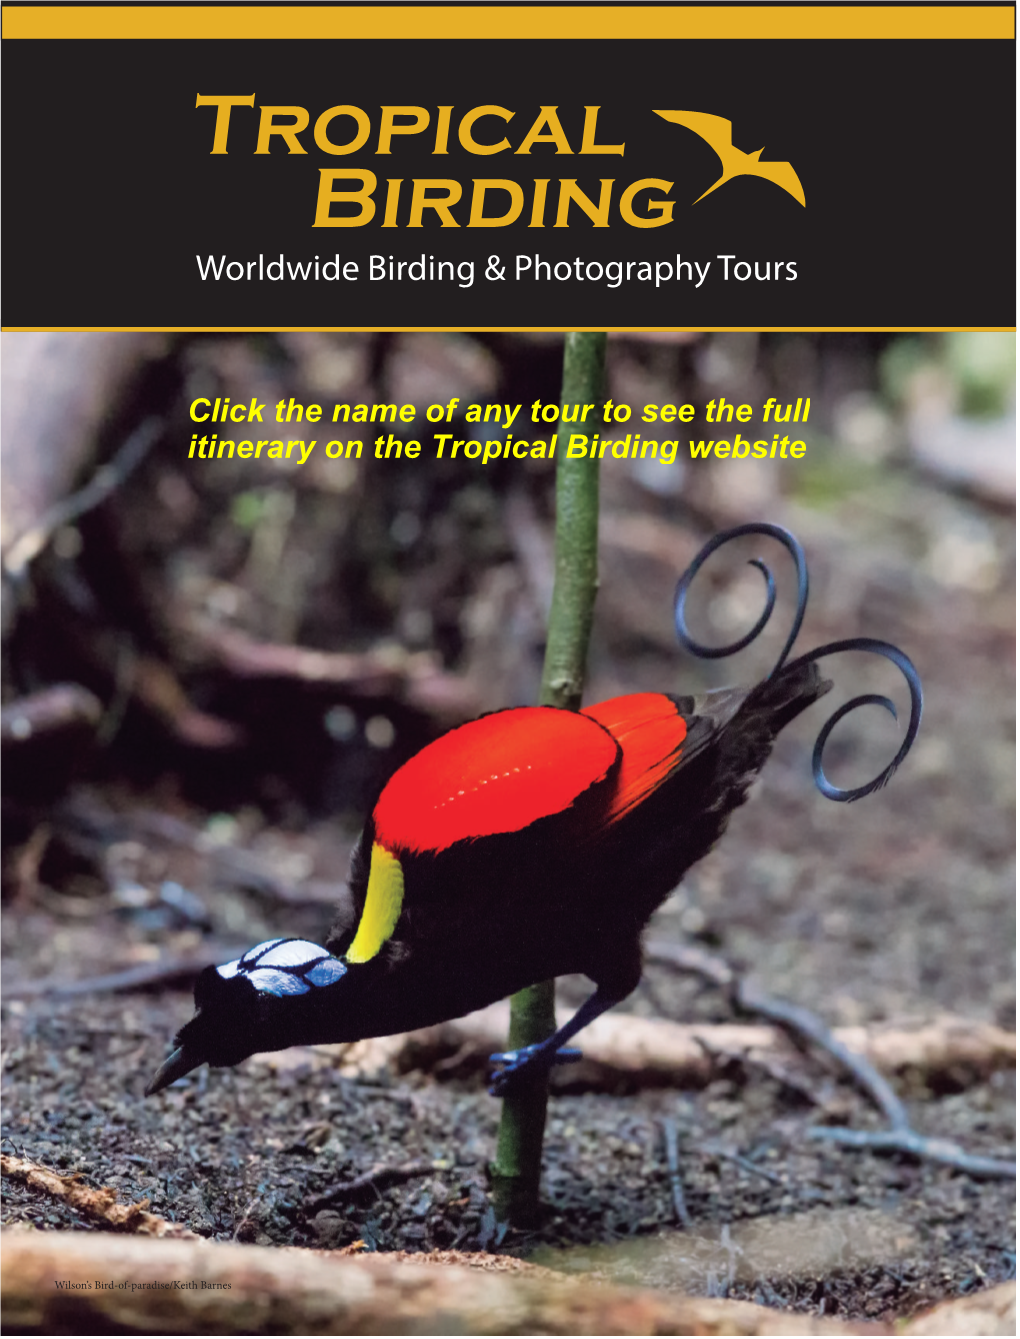 Click the Name of Any Tour to See the Full Itinerary on the Tropical Birding